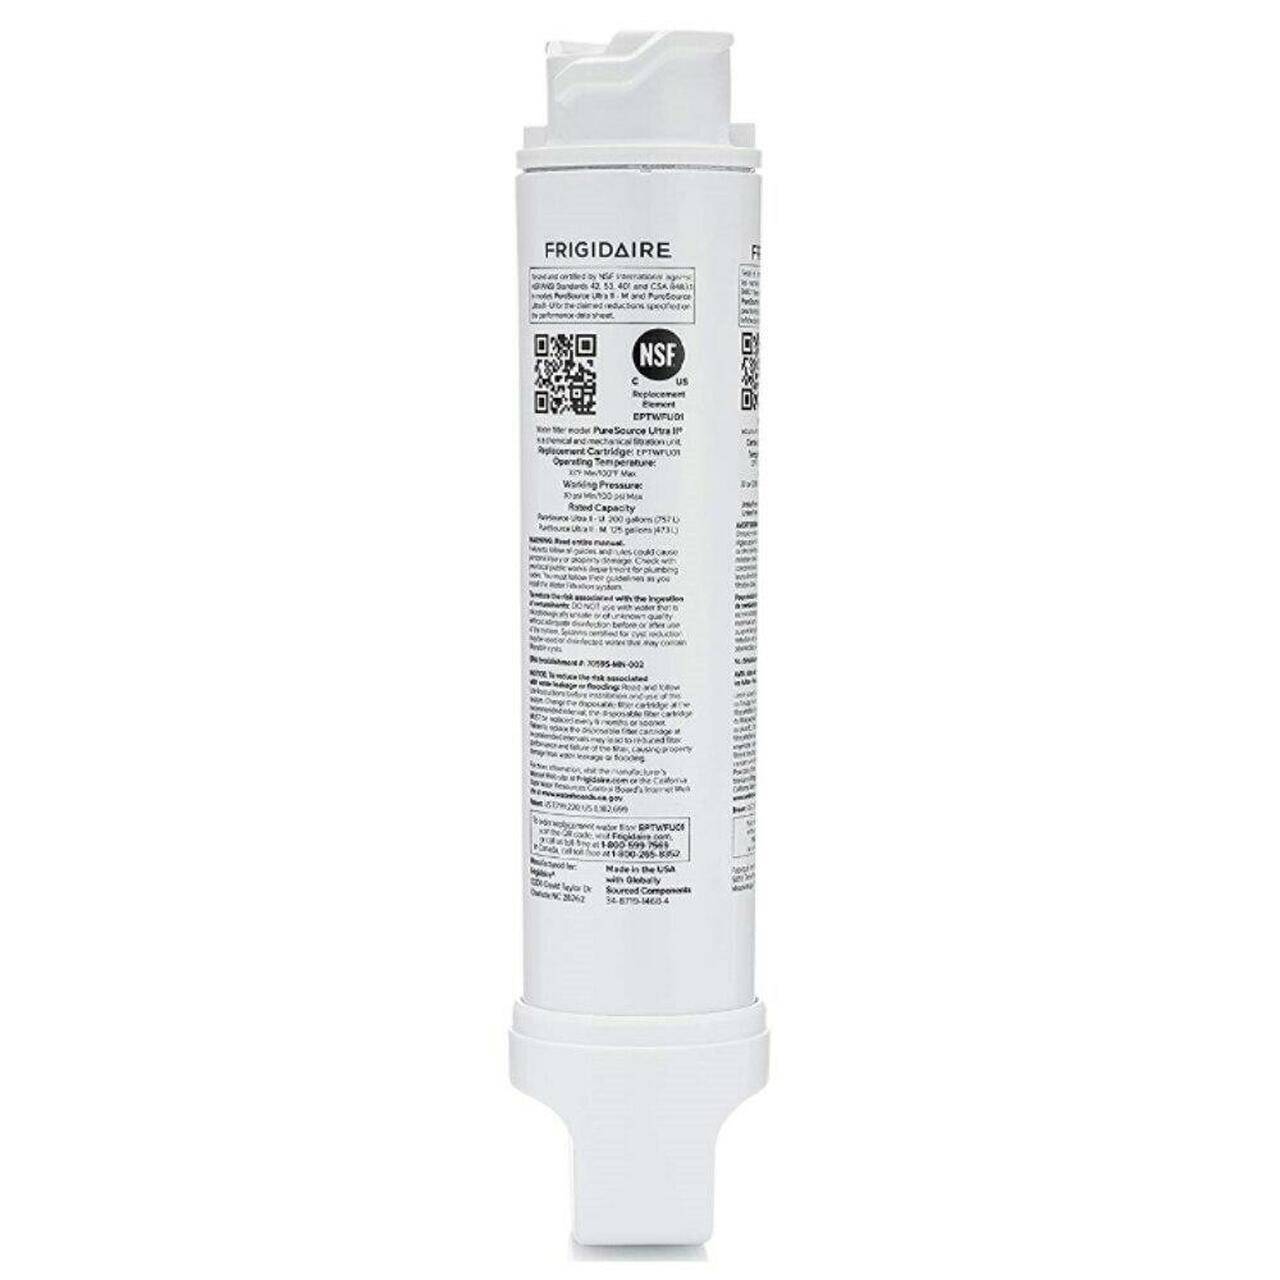 Frigidaire EPTWFU01 Replacement for Electrolux SCWFTCTO1